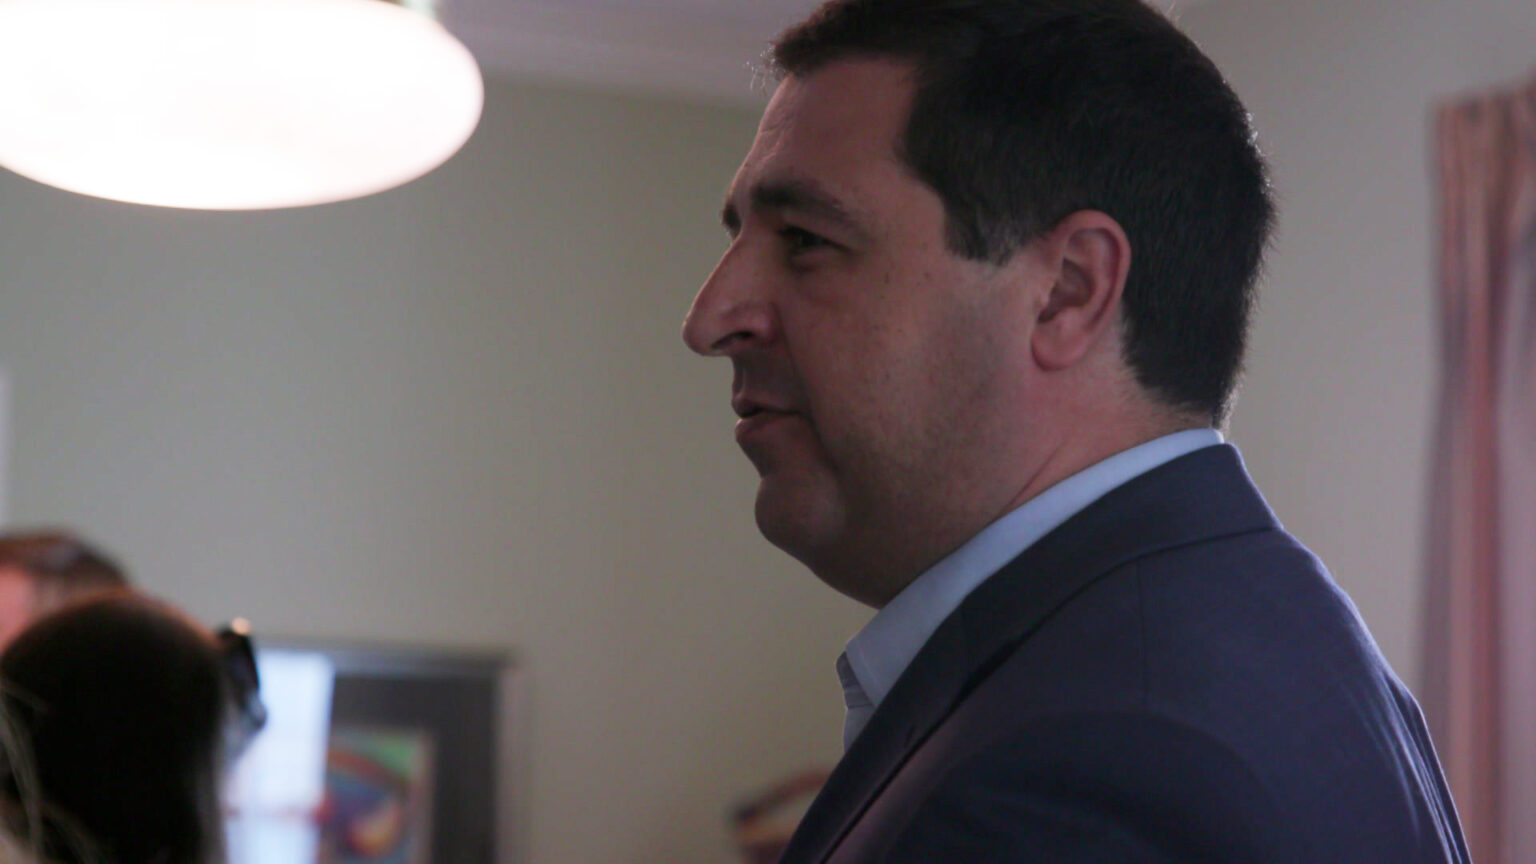 Josh Kaul stands in a room while talking with other people.